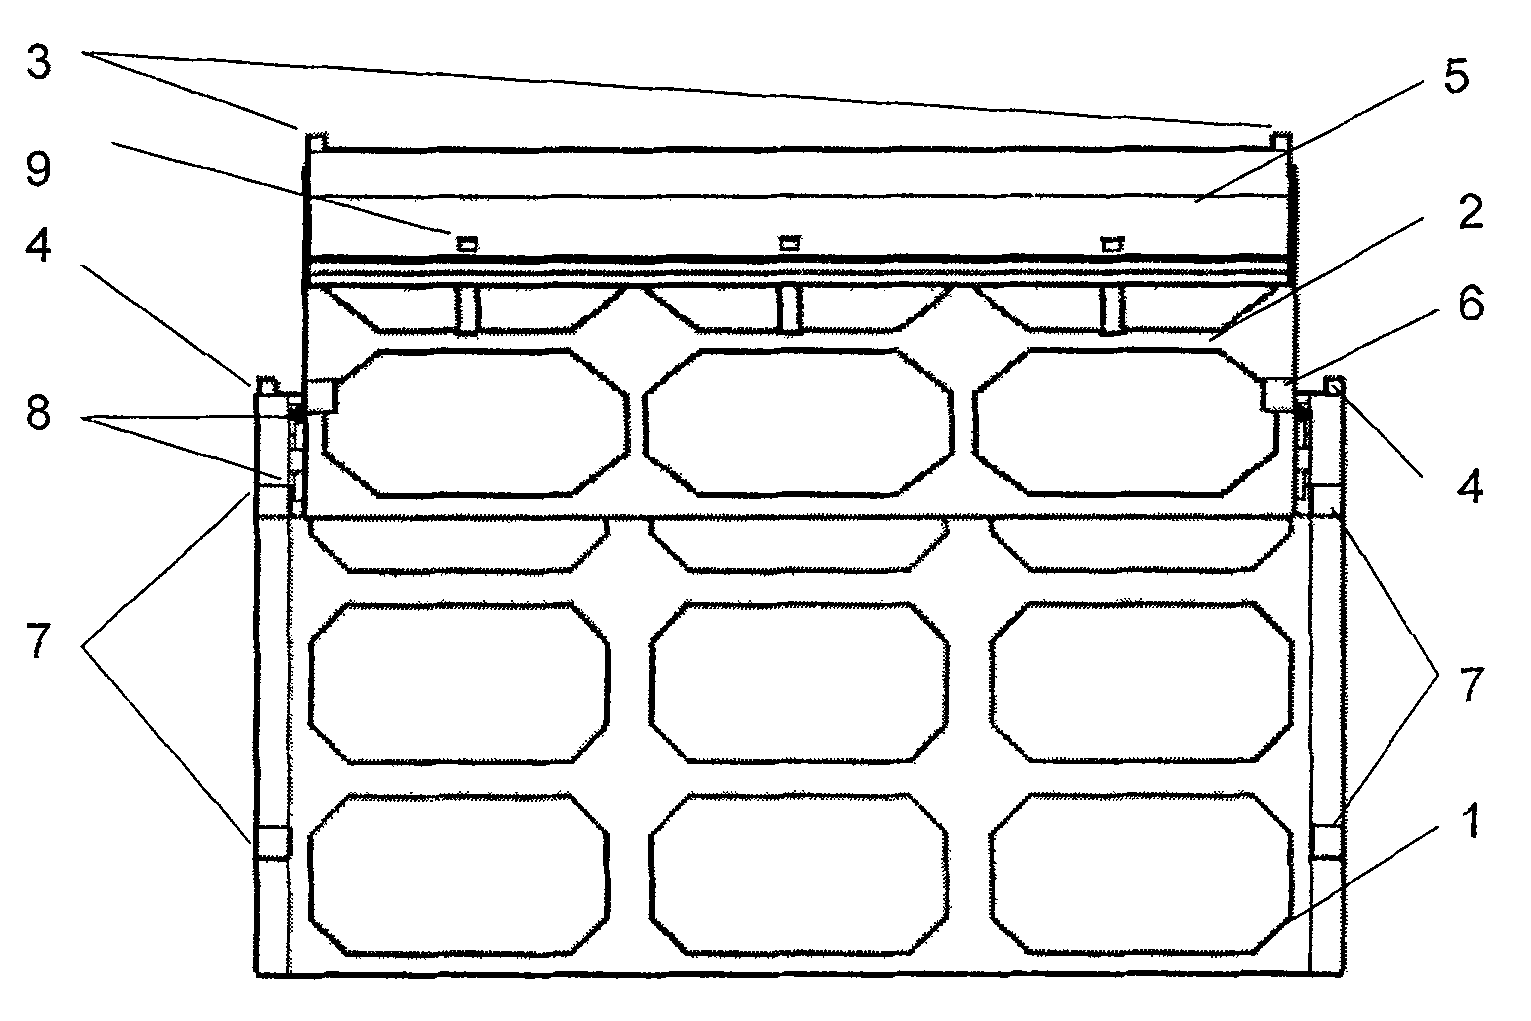 Nested type top overflowing gate